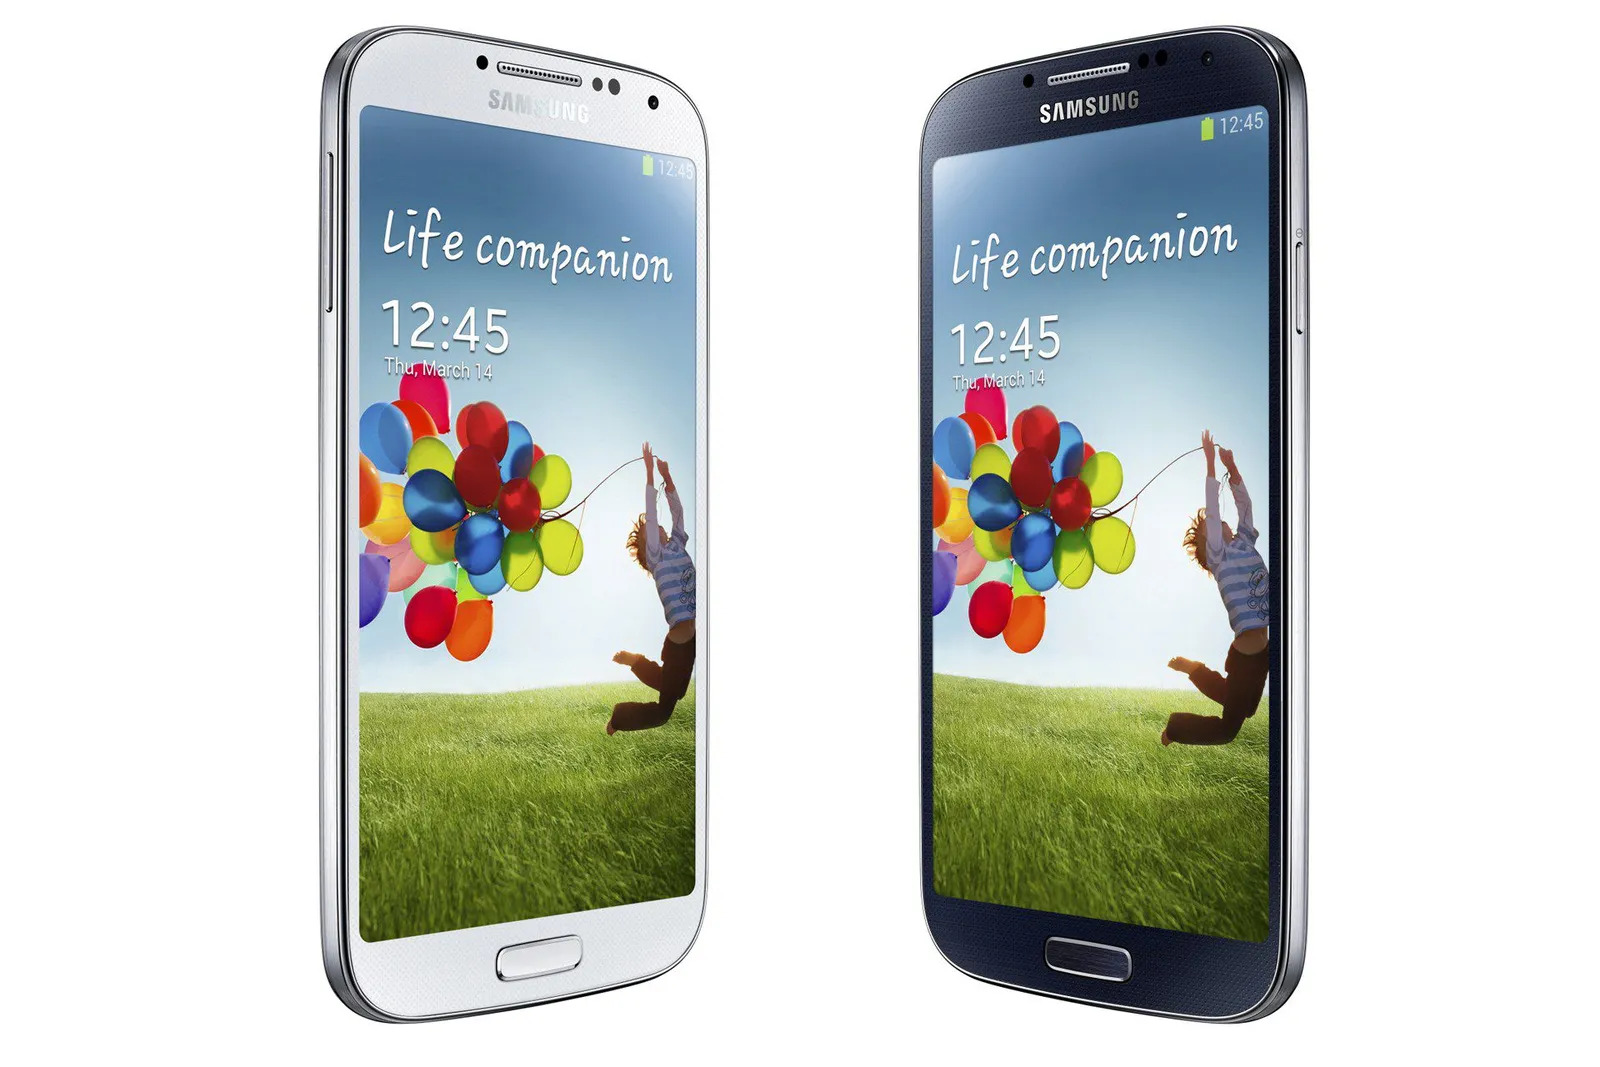 10-best-samsung-galaxy-s4-features-you-might-not-know-about